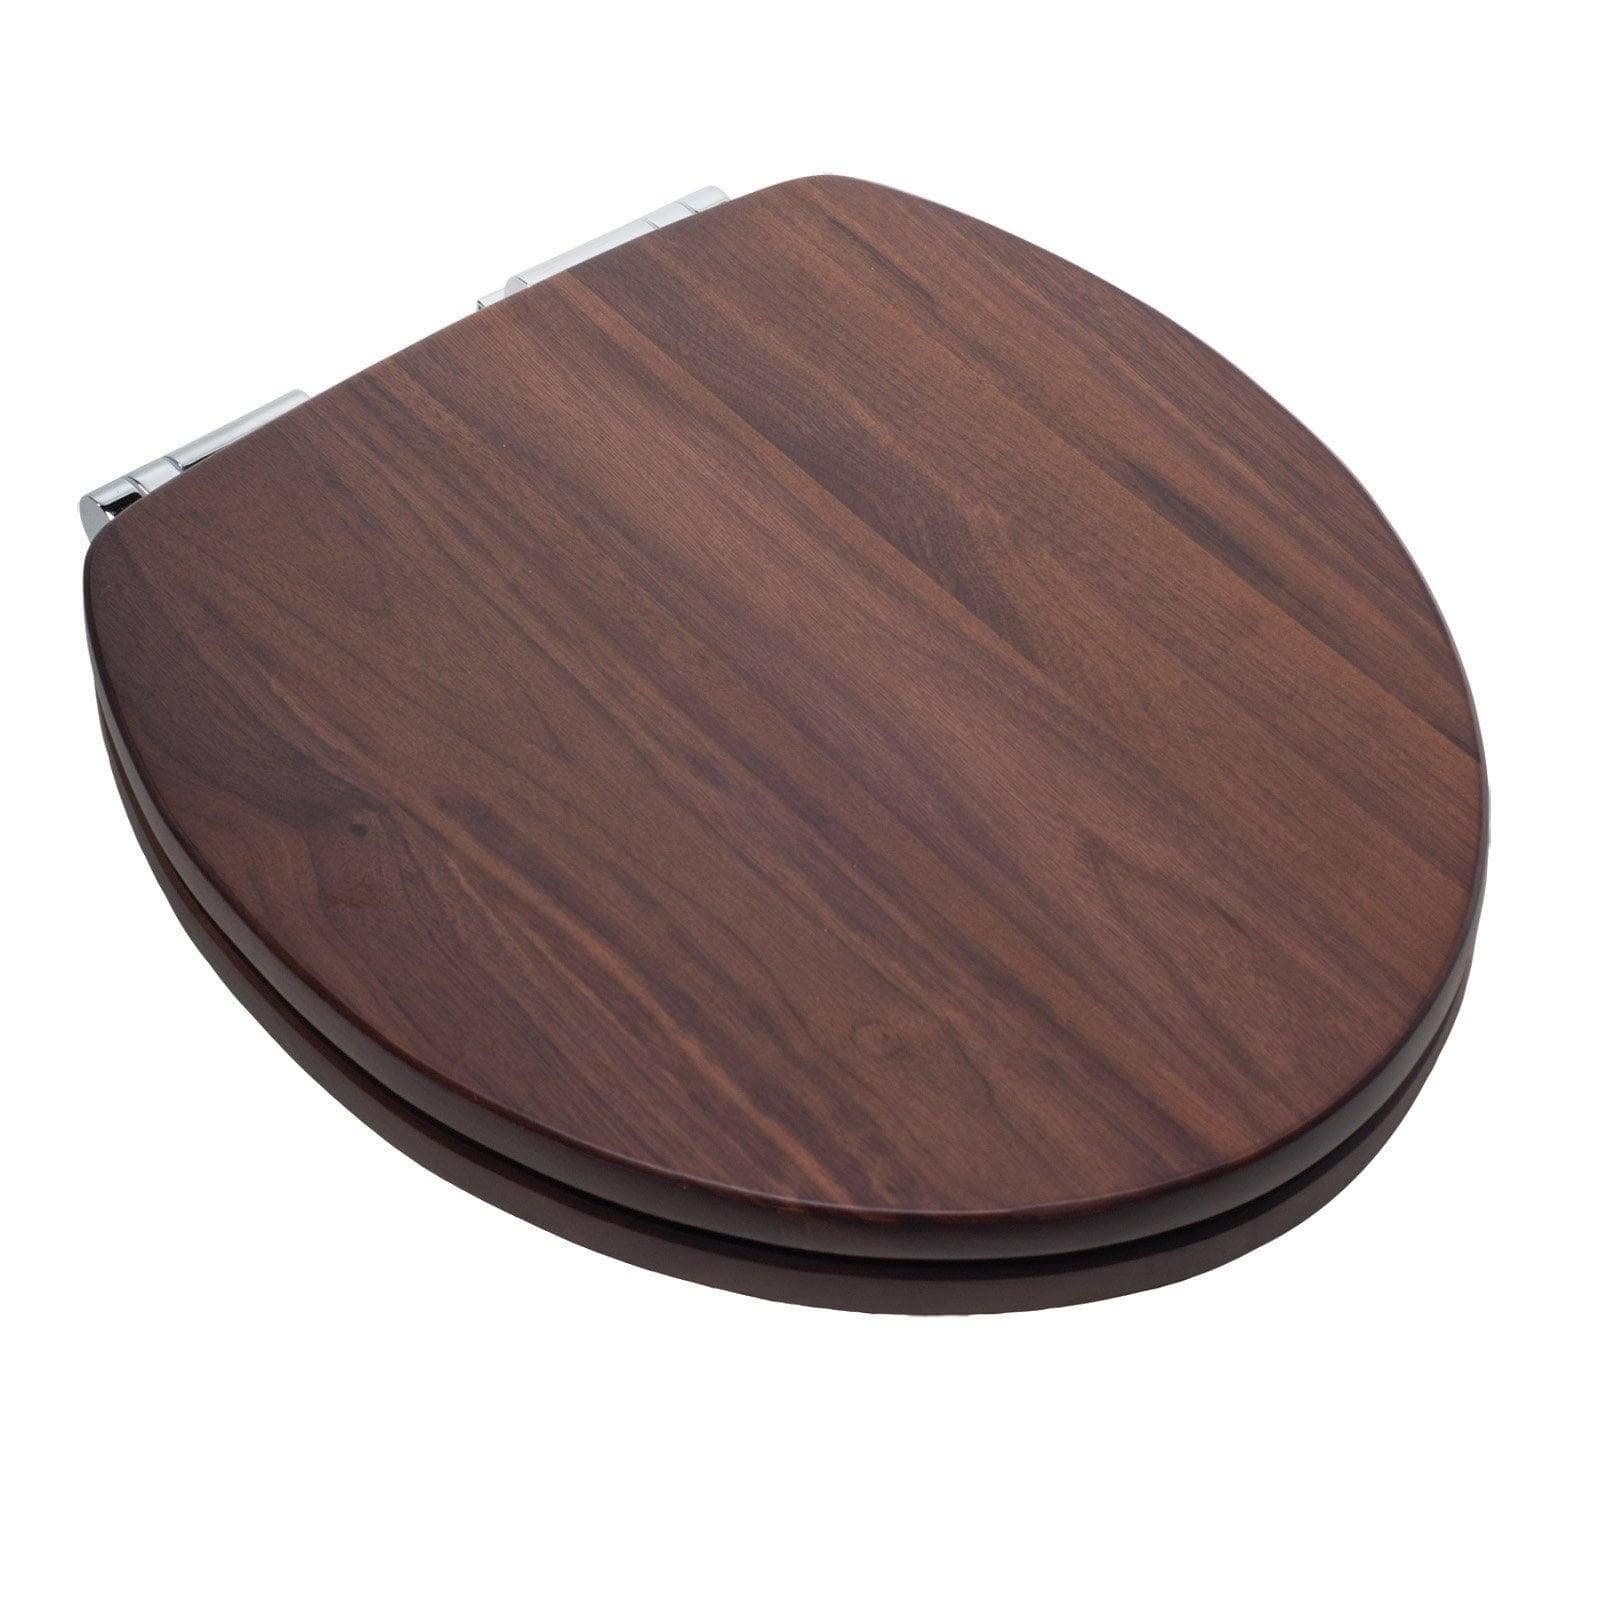 Black Toilet Seat Wooden MDF WITH FITTINGS WOODEN